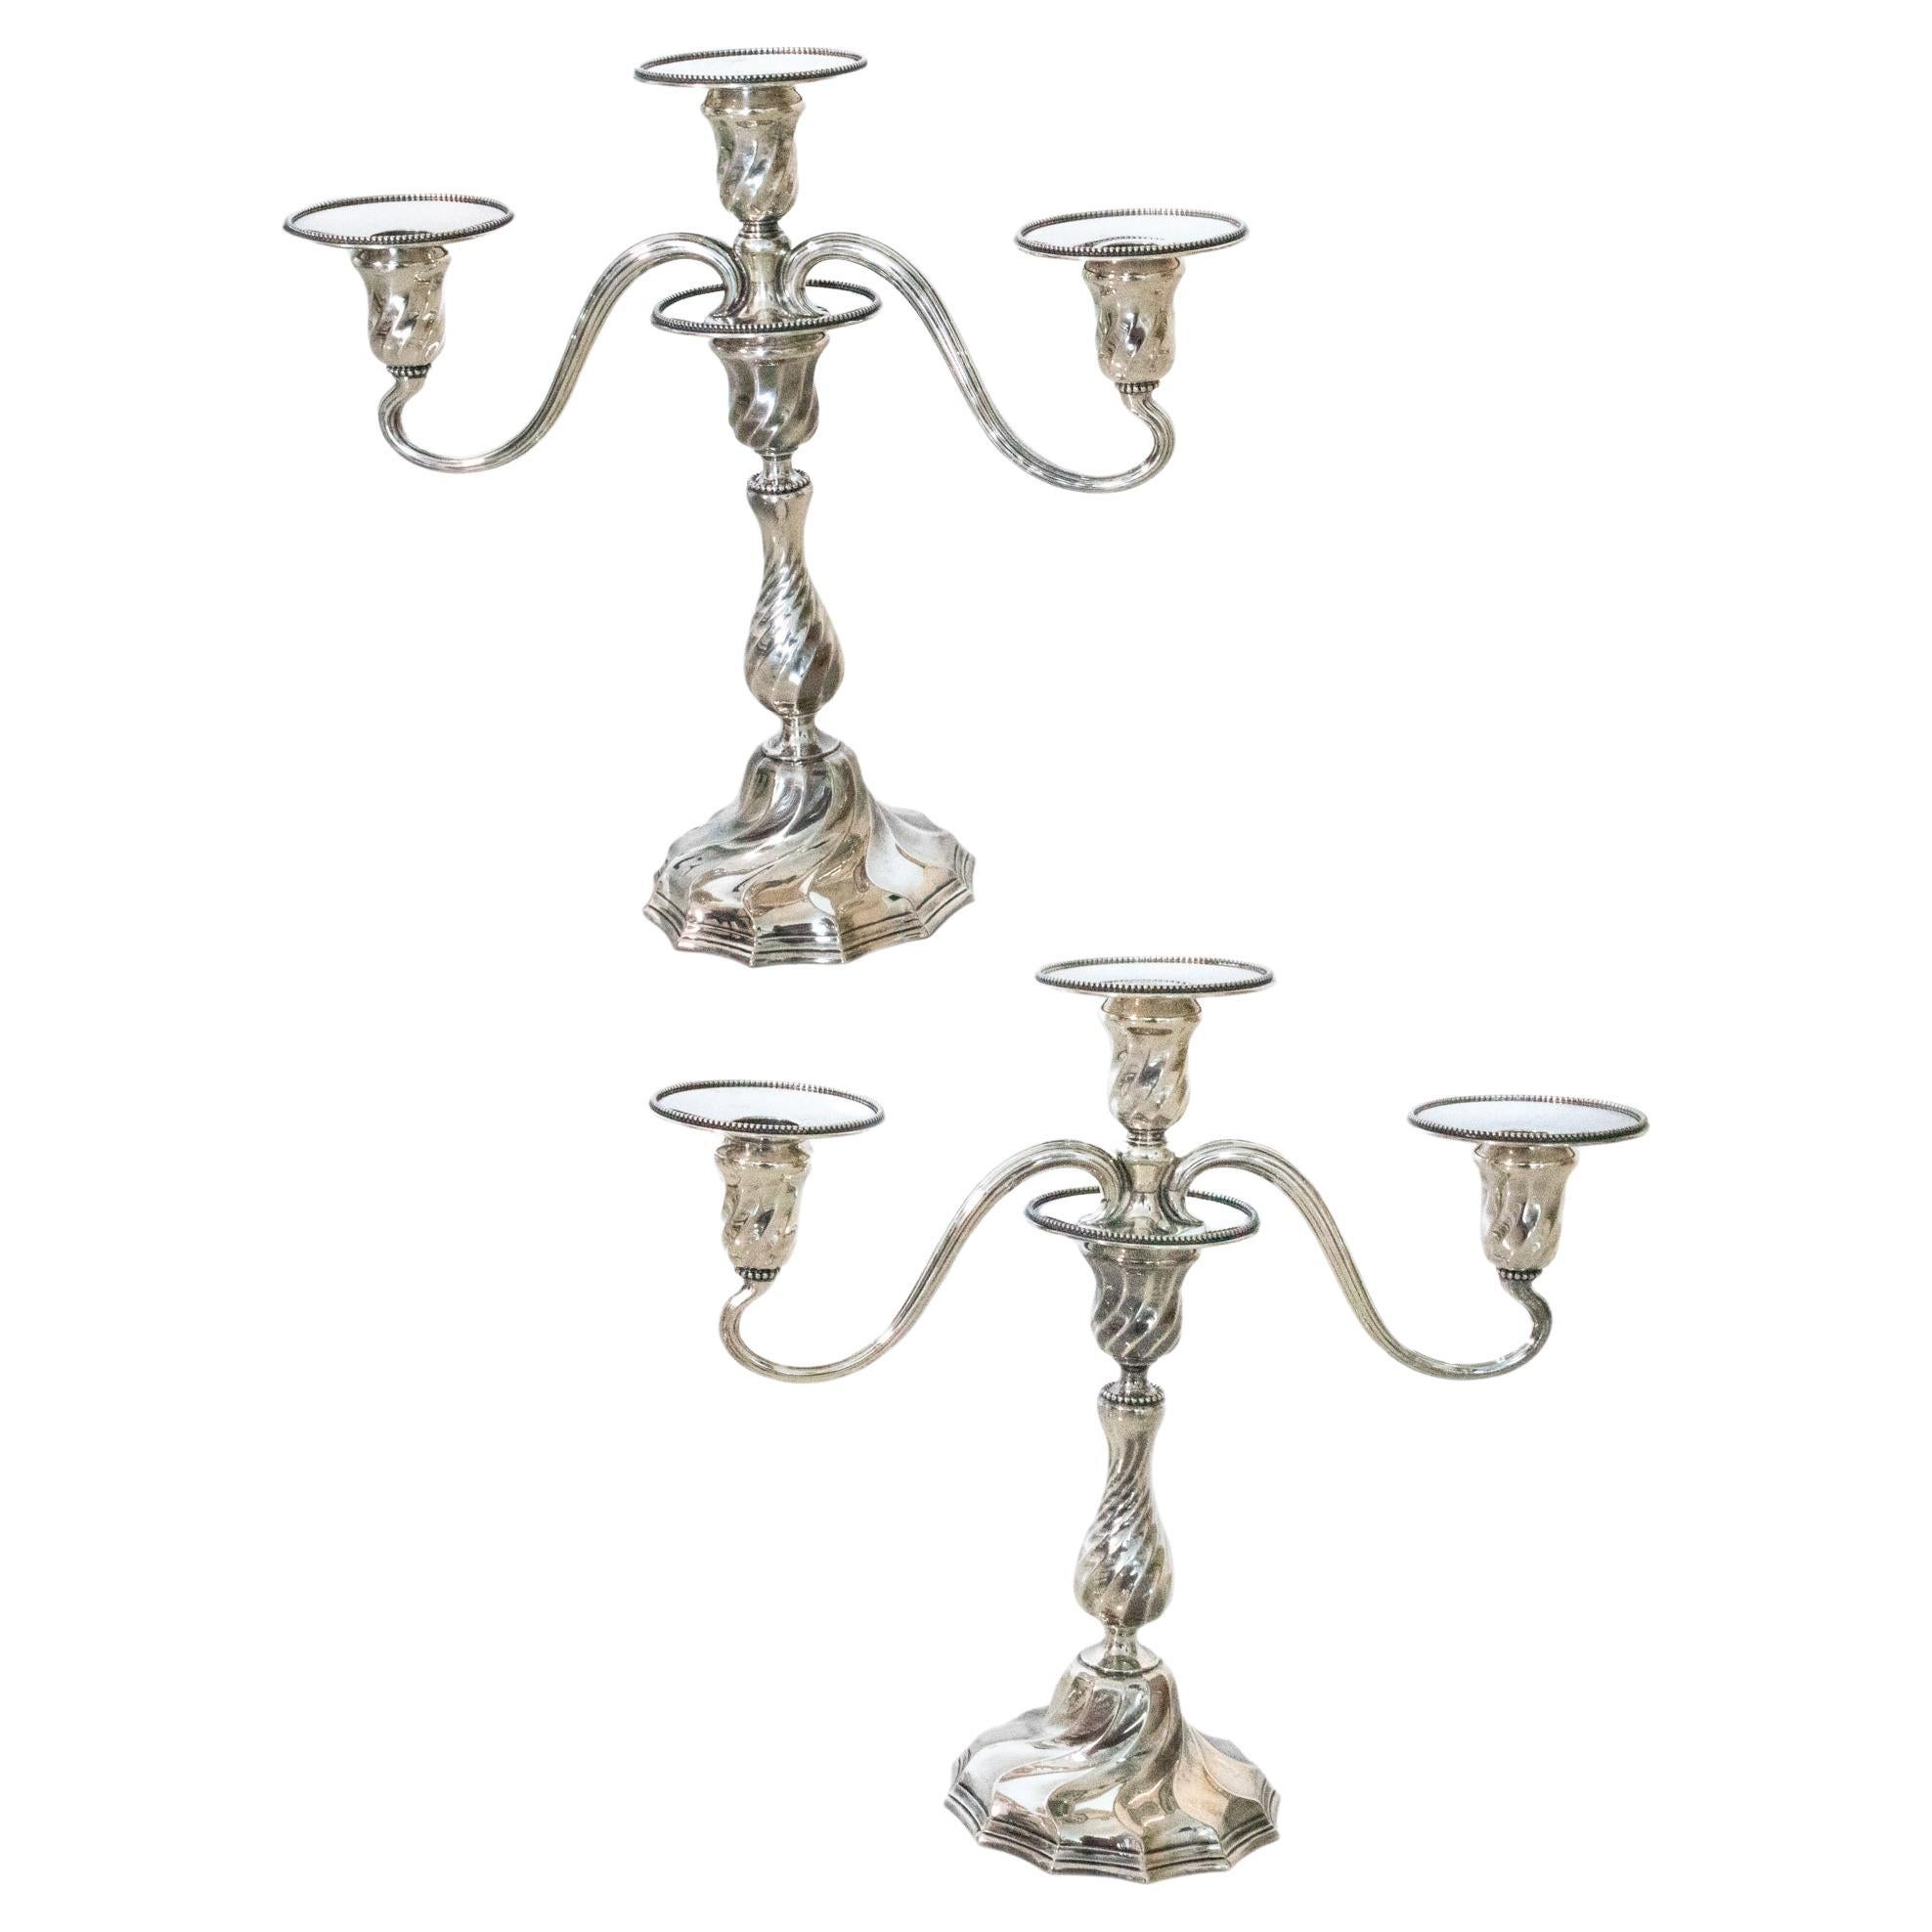 Tiffany & Co. 1902 New York Art Nouveau Pair of Convertible Candelabras Sterling For Sale